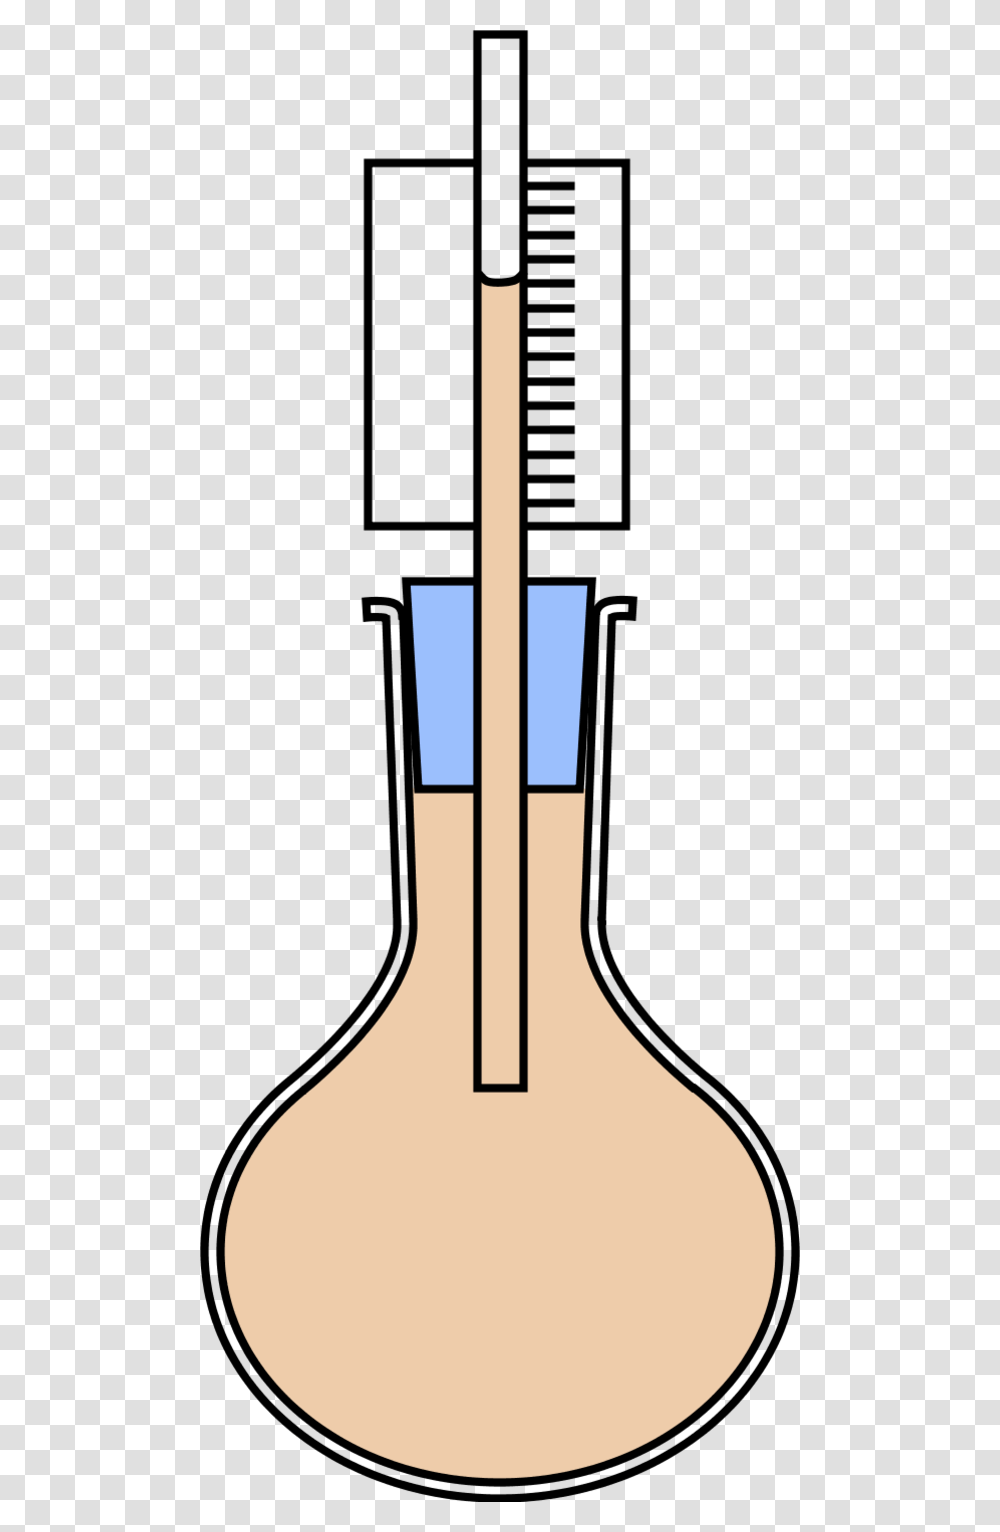 Laboratory Flasks Erlenmeyer Flask Thermal Expansion Expansion Of Liquid Experiment, Shovel, Tool, Oars Transparent Png